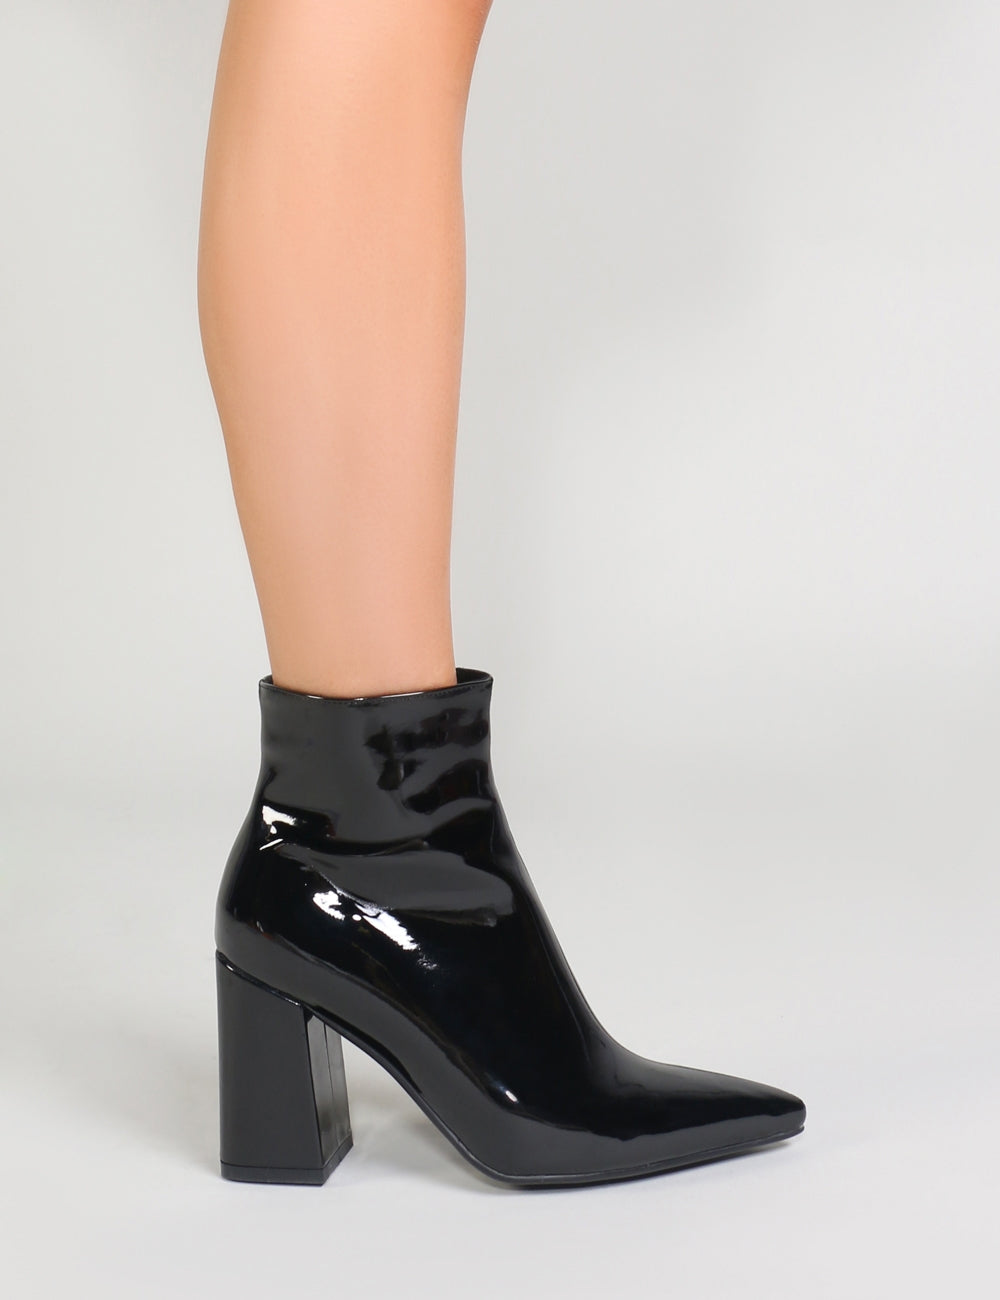 Empire Pointed Toe Ankle Boots in Black 